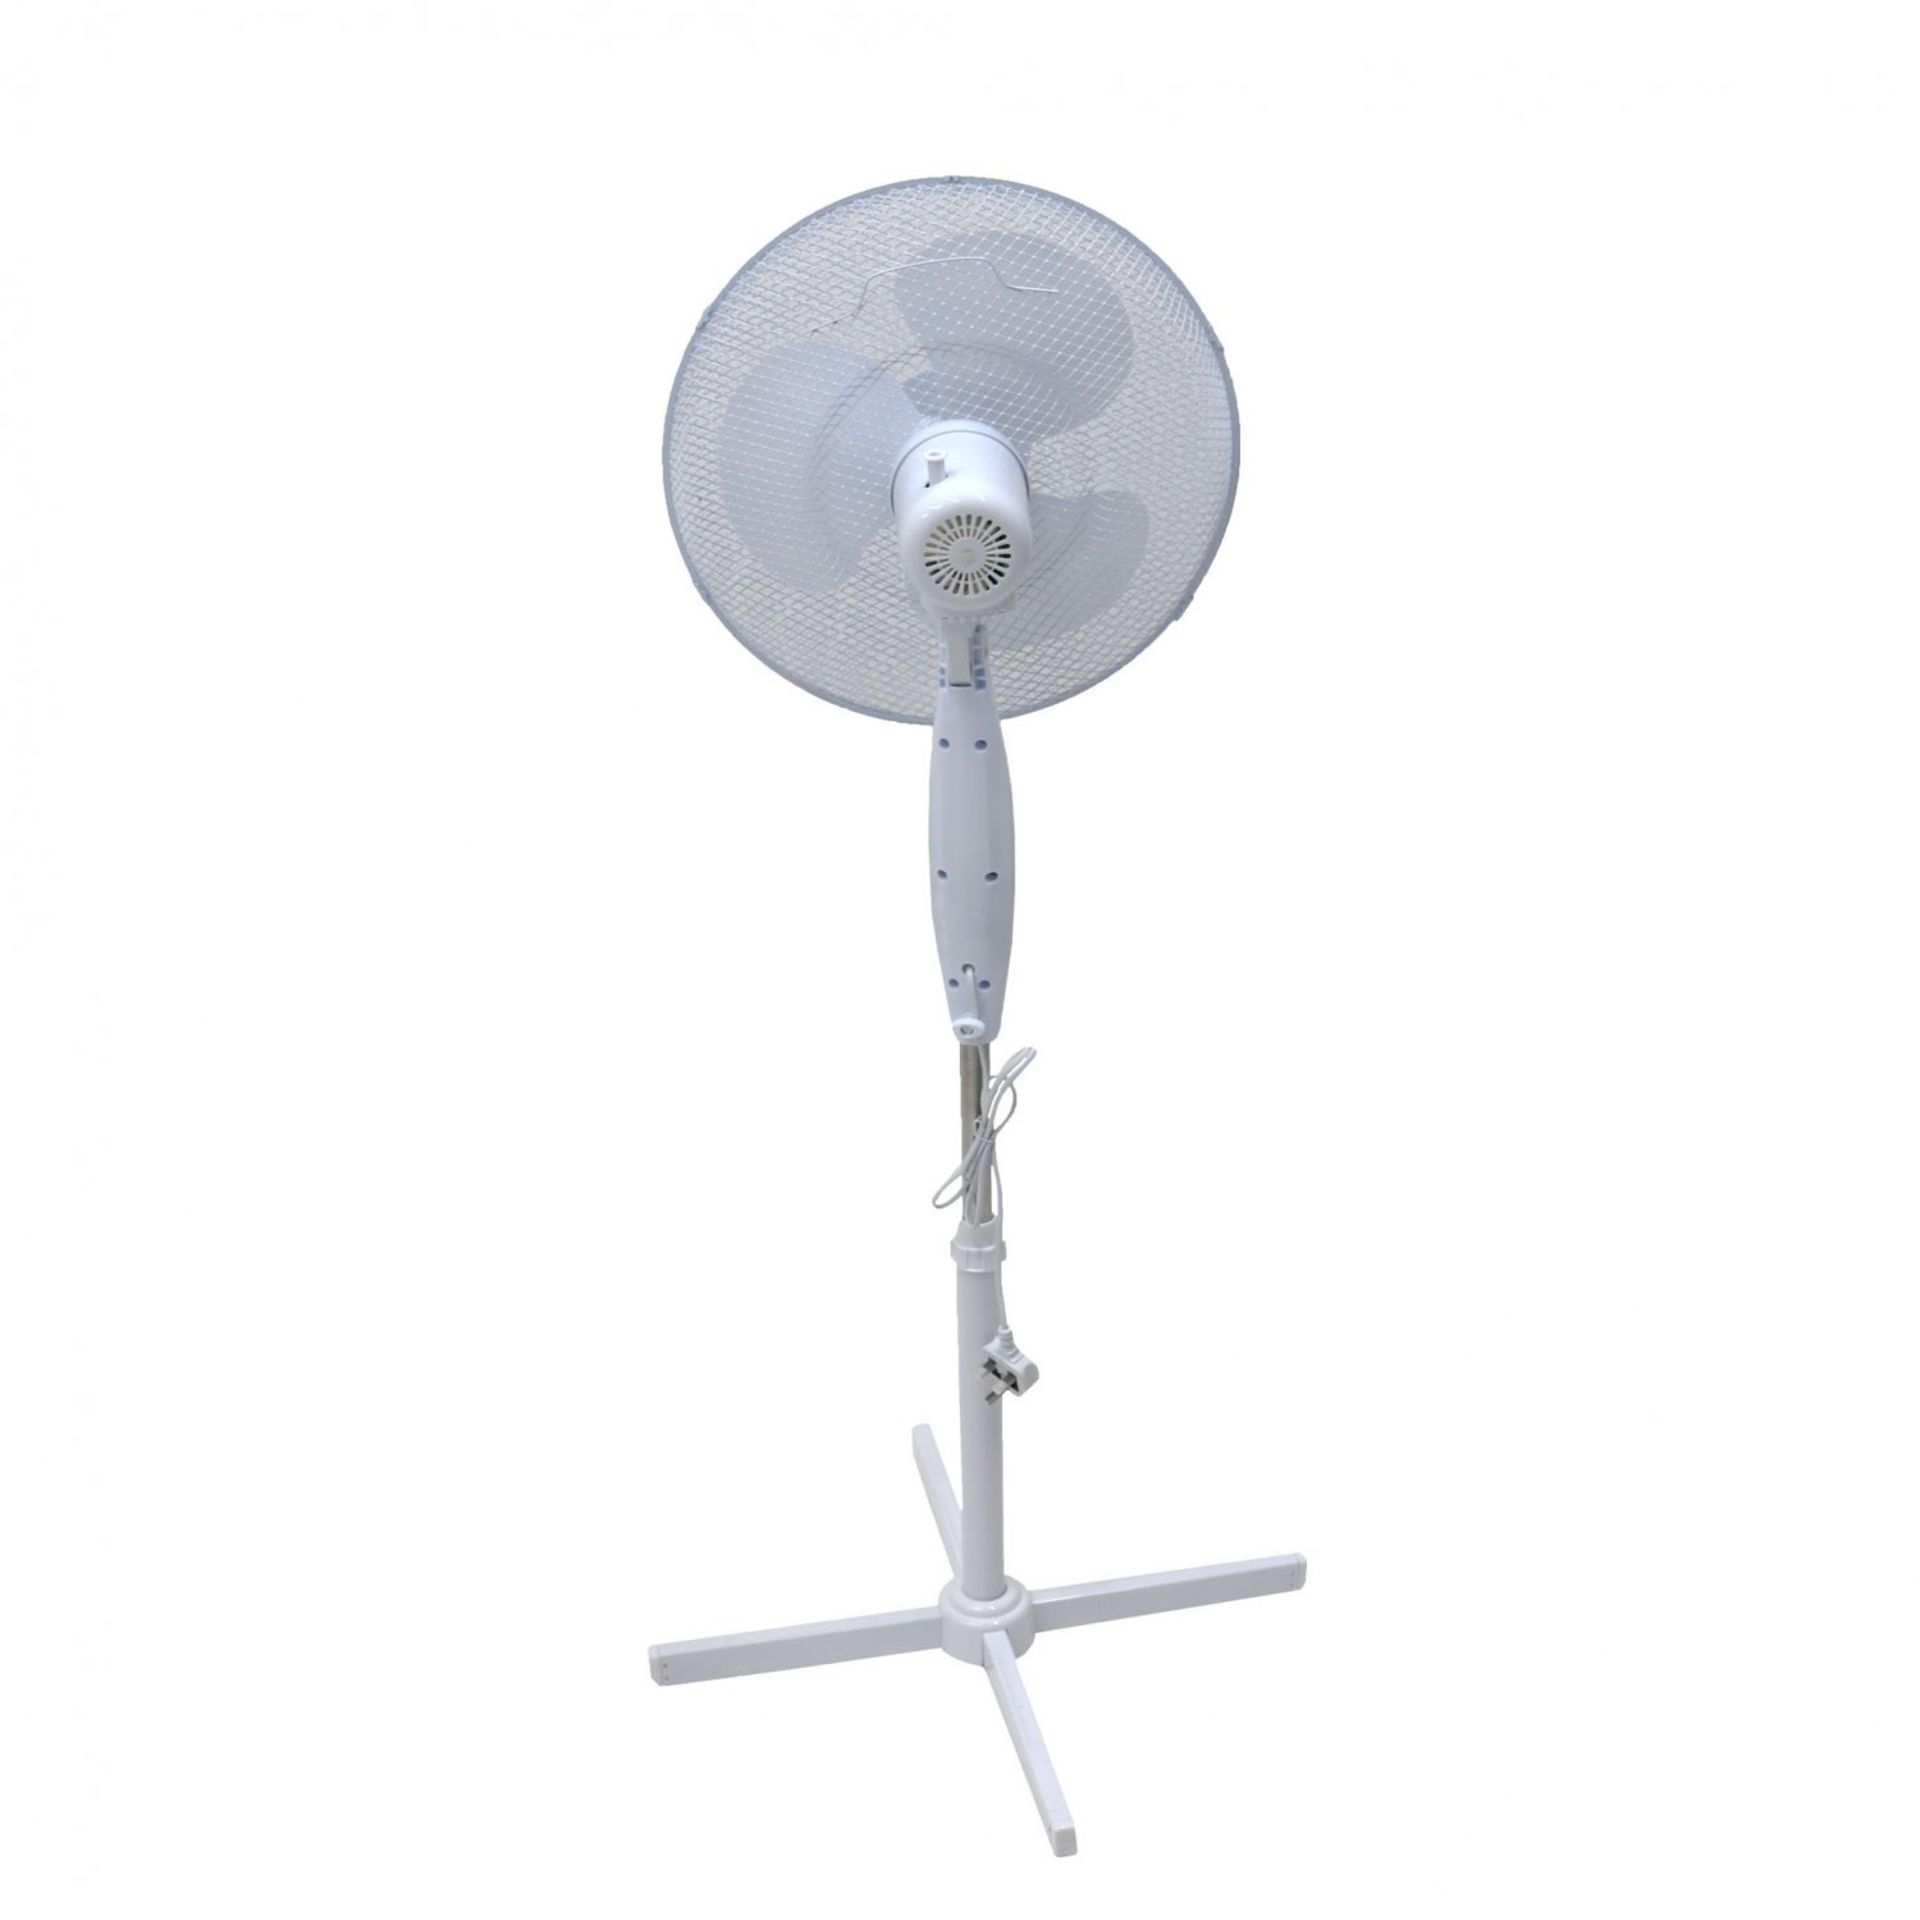 (LF20) 16" Oscillating Pedestal Electric Fan The fan head oscillates and tilts which me... - Image 2 of 2